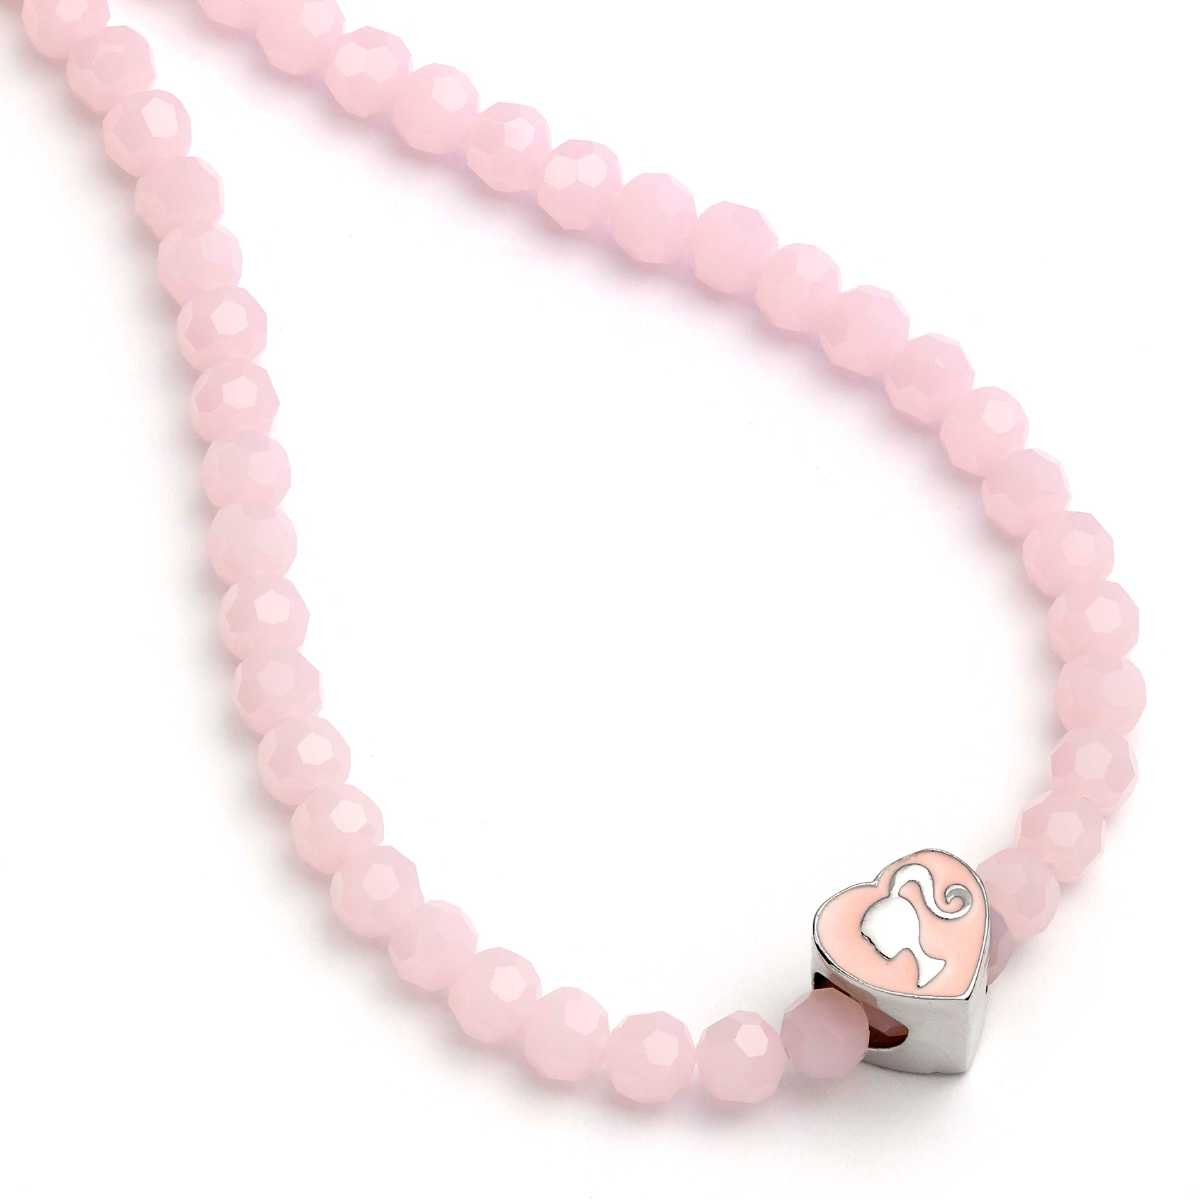 Barbie™️ Pink Bead Necklace with Heart Shaped Silhouette Bead Charm - Barbie x Carat Shop - Simon's Collectibles